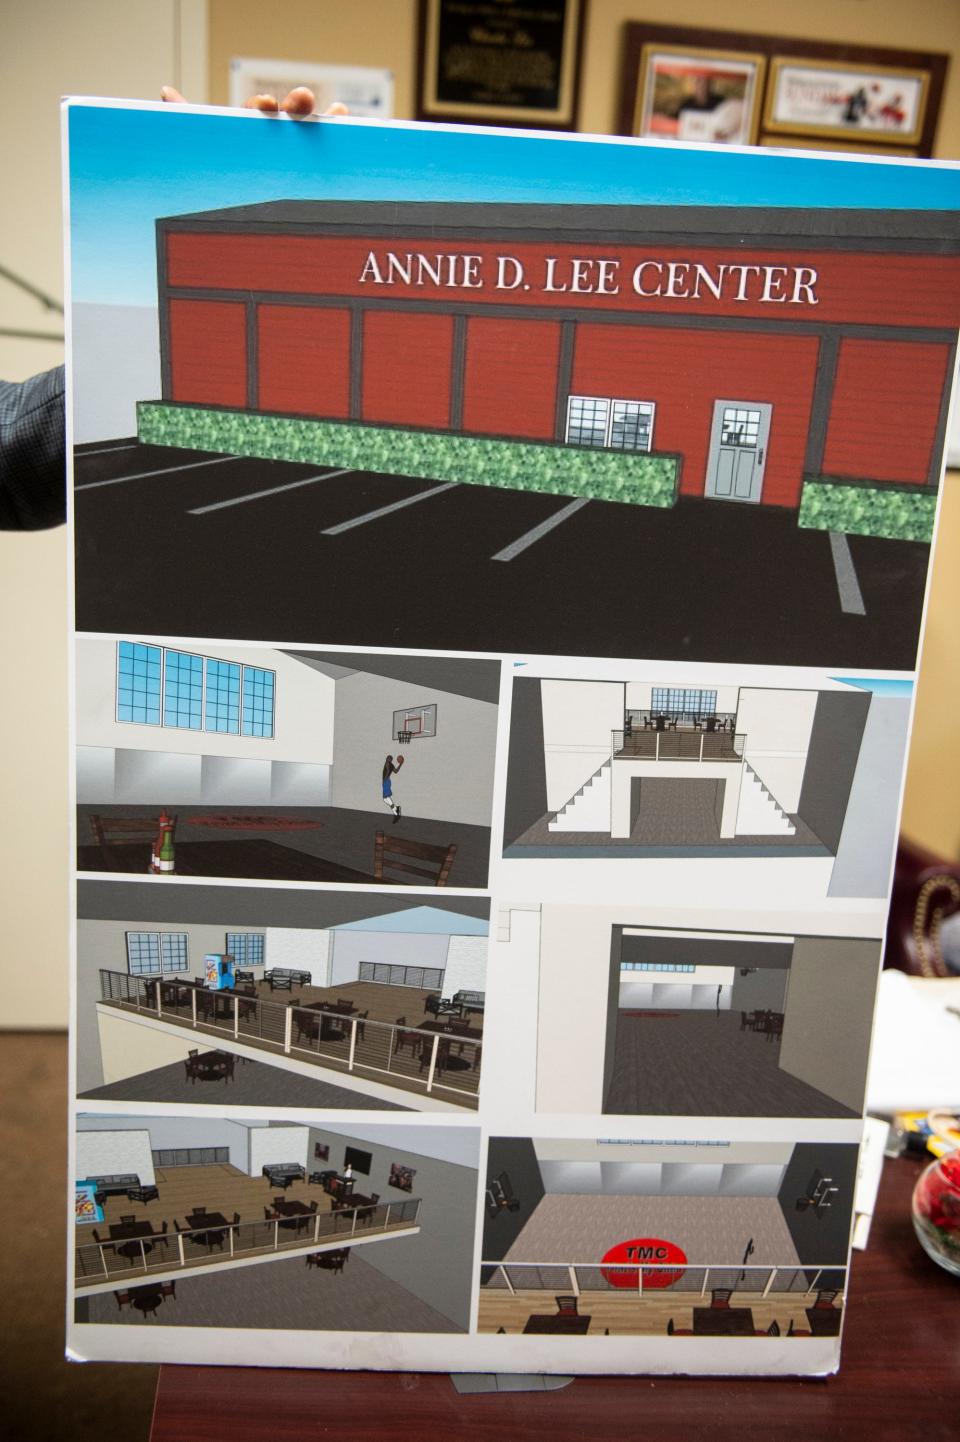 A rendering of the Annie D. Lee Center, a proposed extension of the That’s My Child campus in Montgomery, is displayed on July 11, 2022.